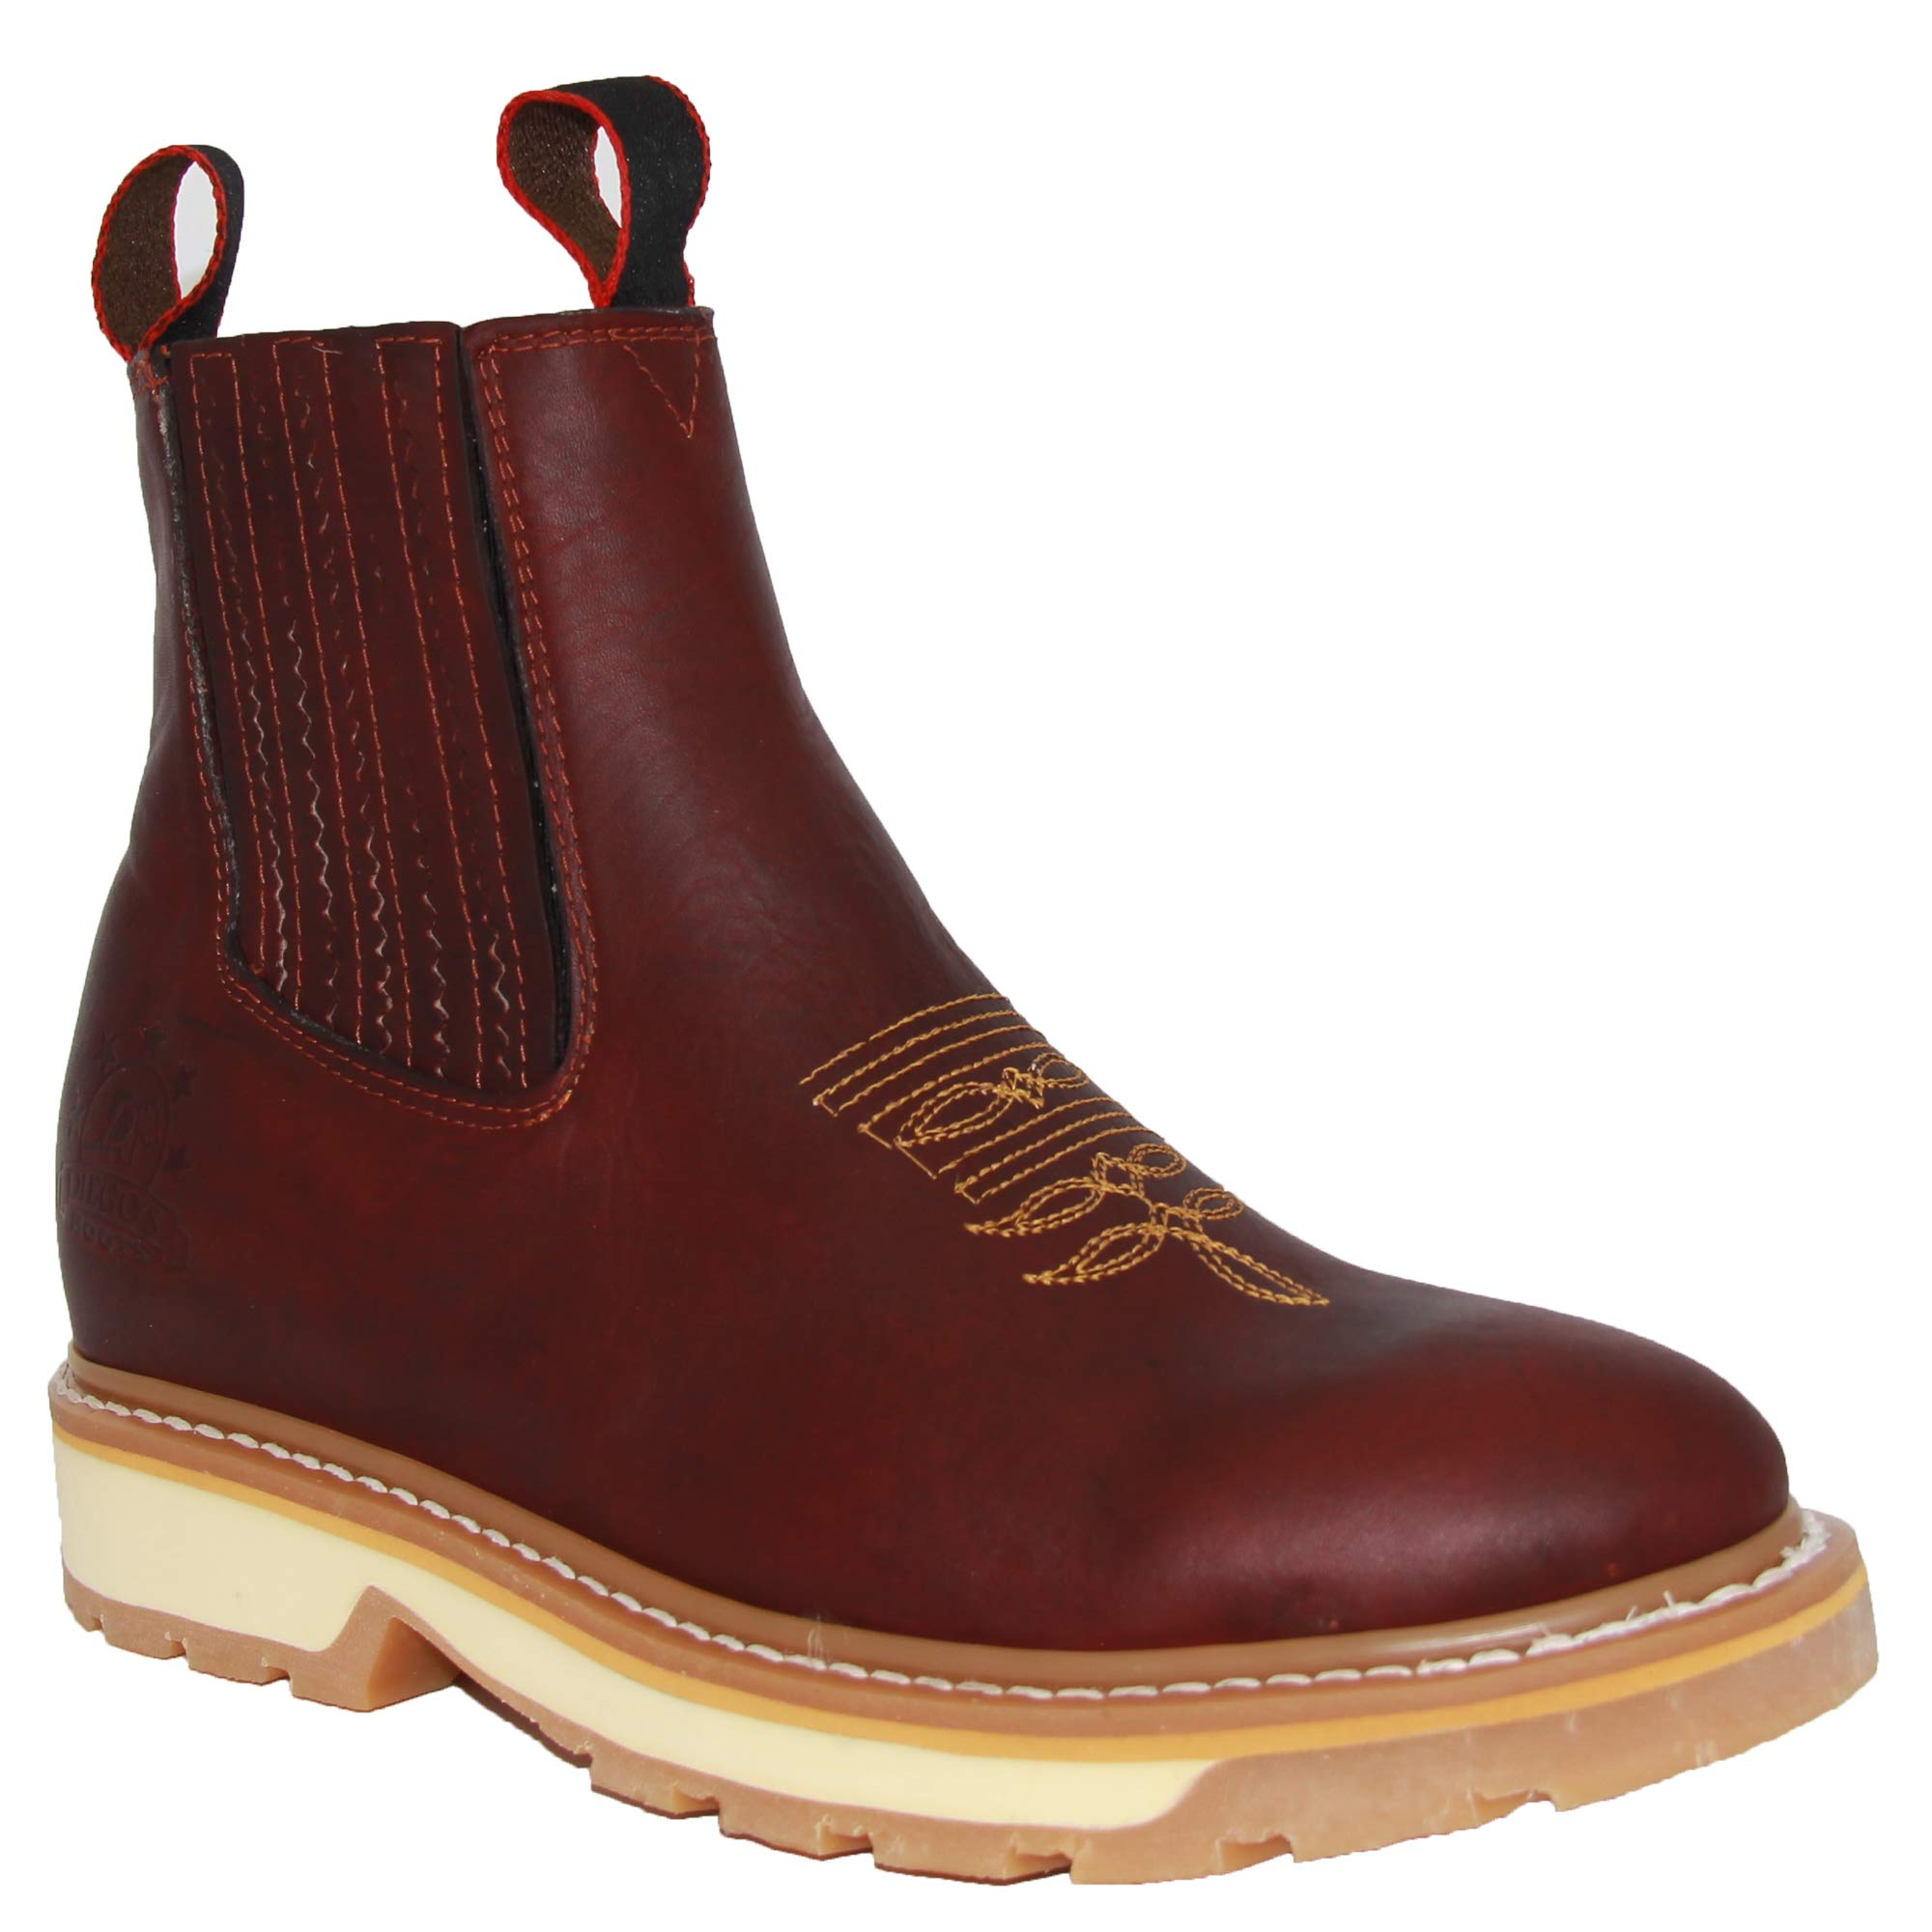 The Western Shops Leather Short Ankle Soft Toe Work Boot - image 1 of 4